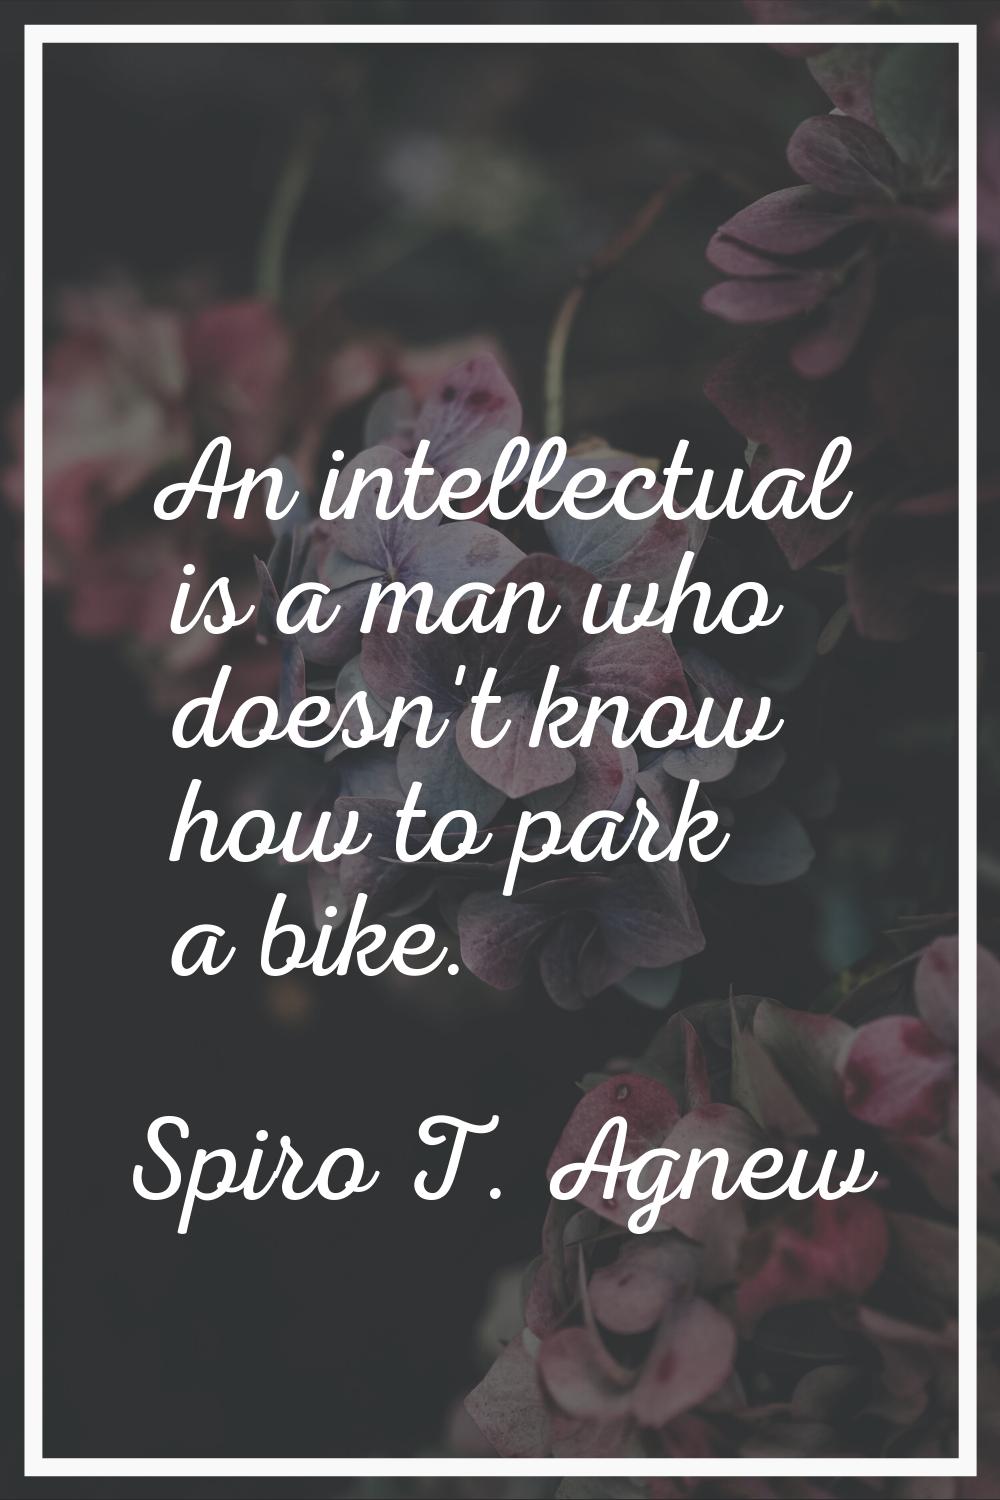 An intellectual is a man who doesn't know how to park a bike.